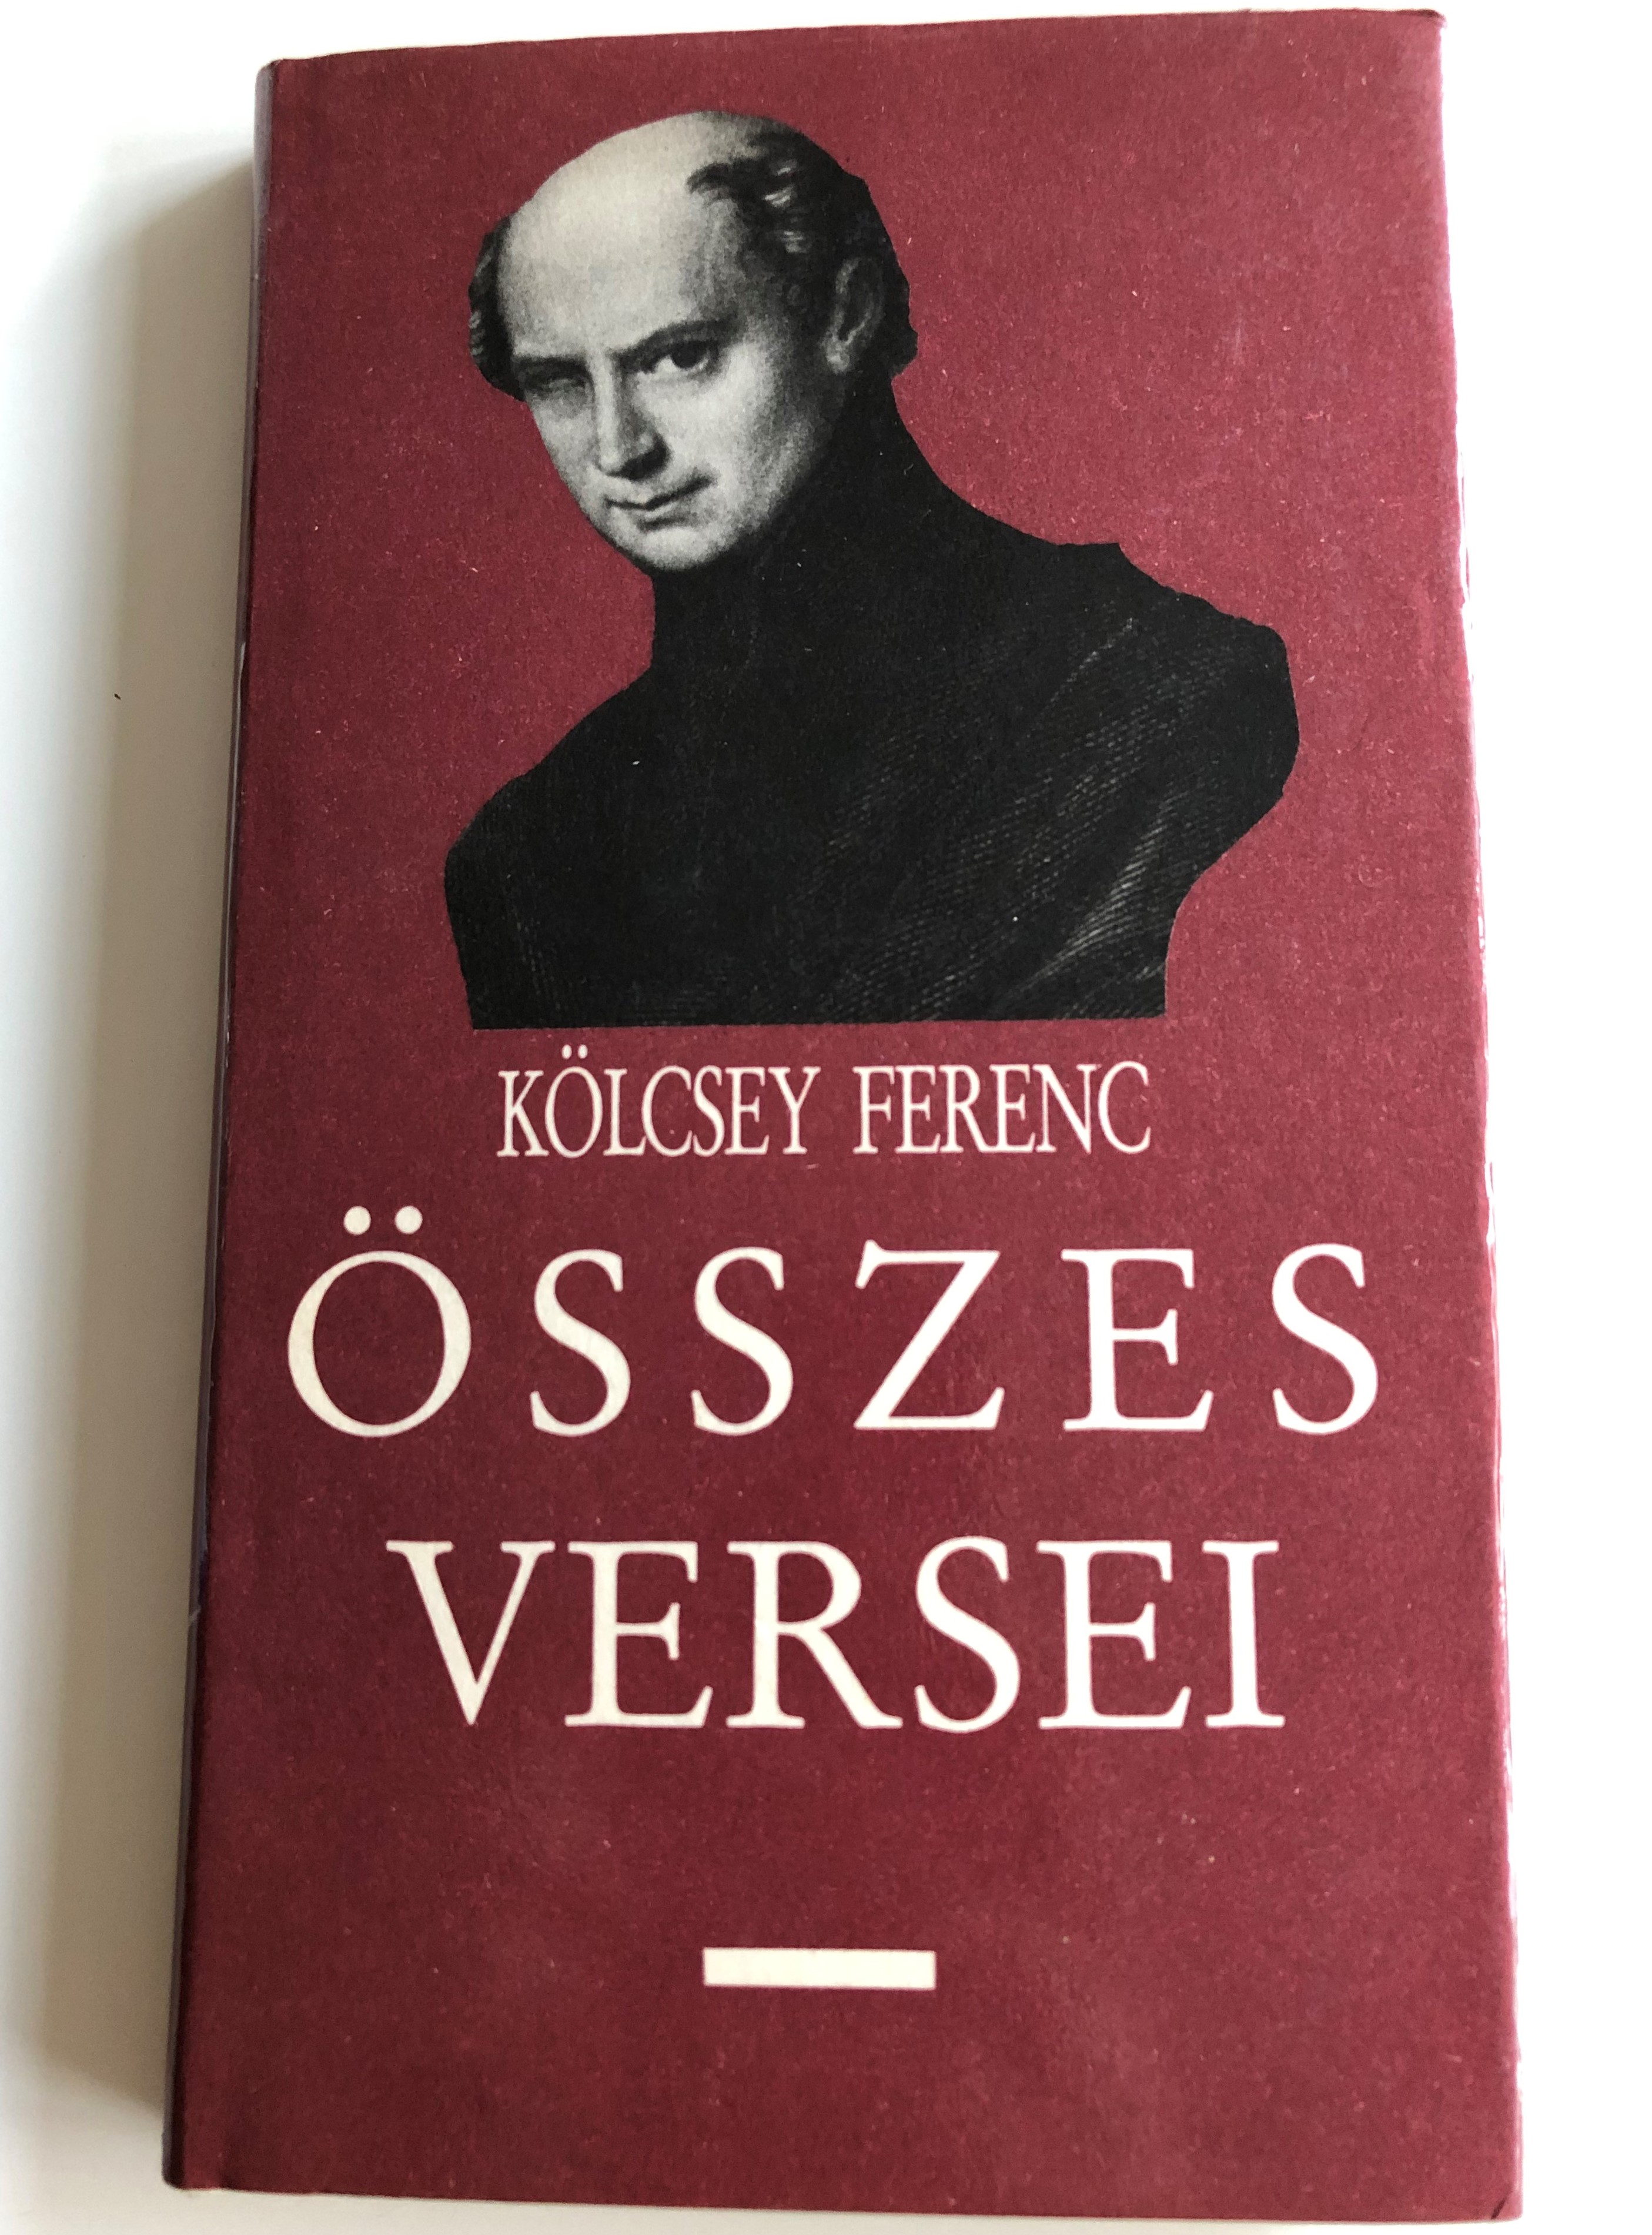 k-lcsey-ferenc-sszes-versei-all-poems-of-ferenc-k-lcsey-1.jpg